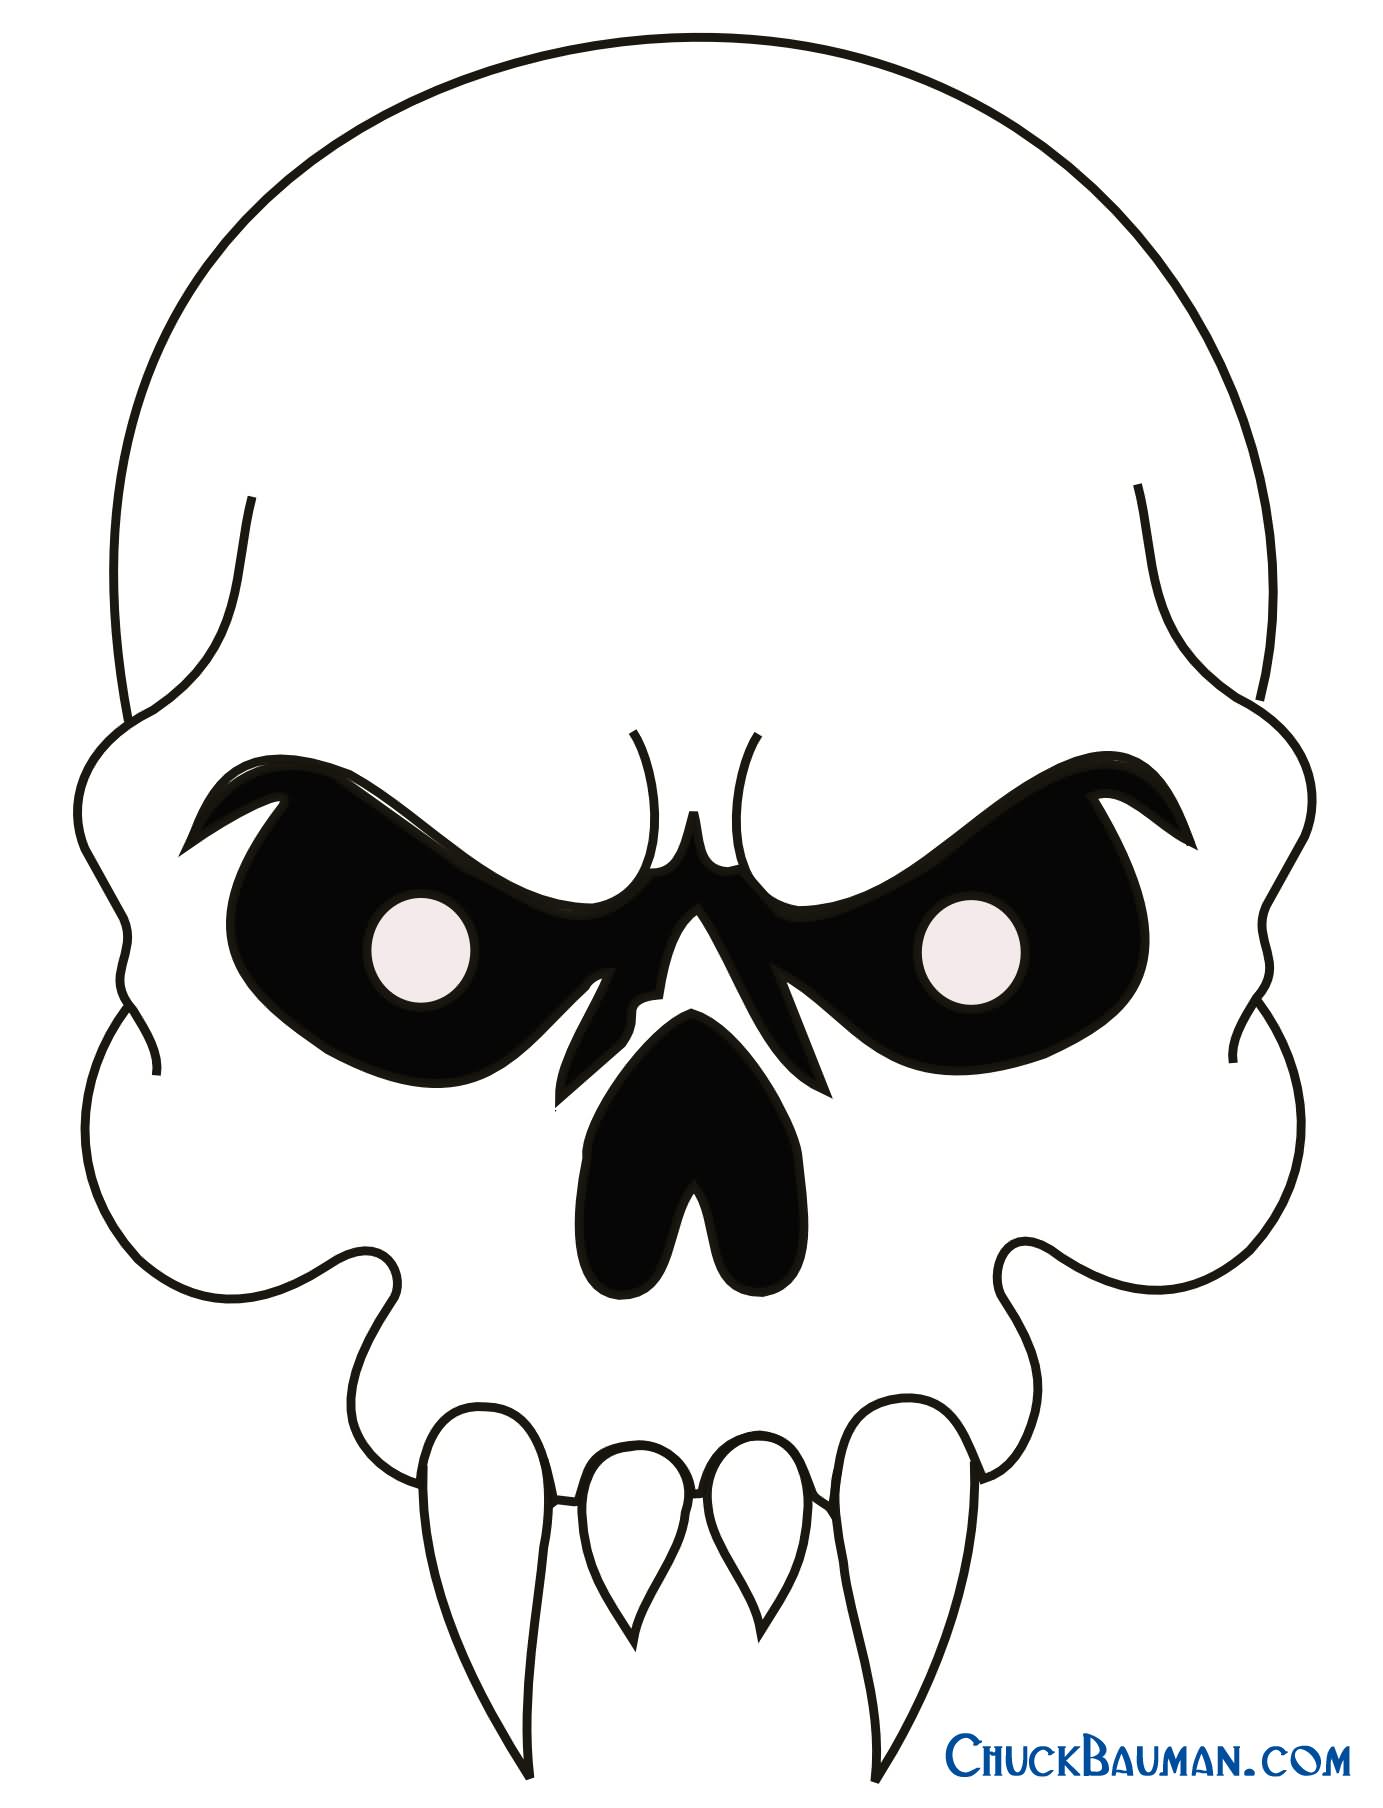 Beginner Skull Tattoo Easy Tattoo Design This type of font is quite easy to draw but to make it look good on a tattoo the key is to use straight lines. beginner skull tattoo easy tattoo design